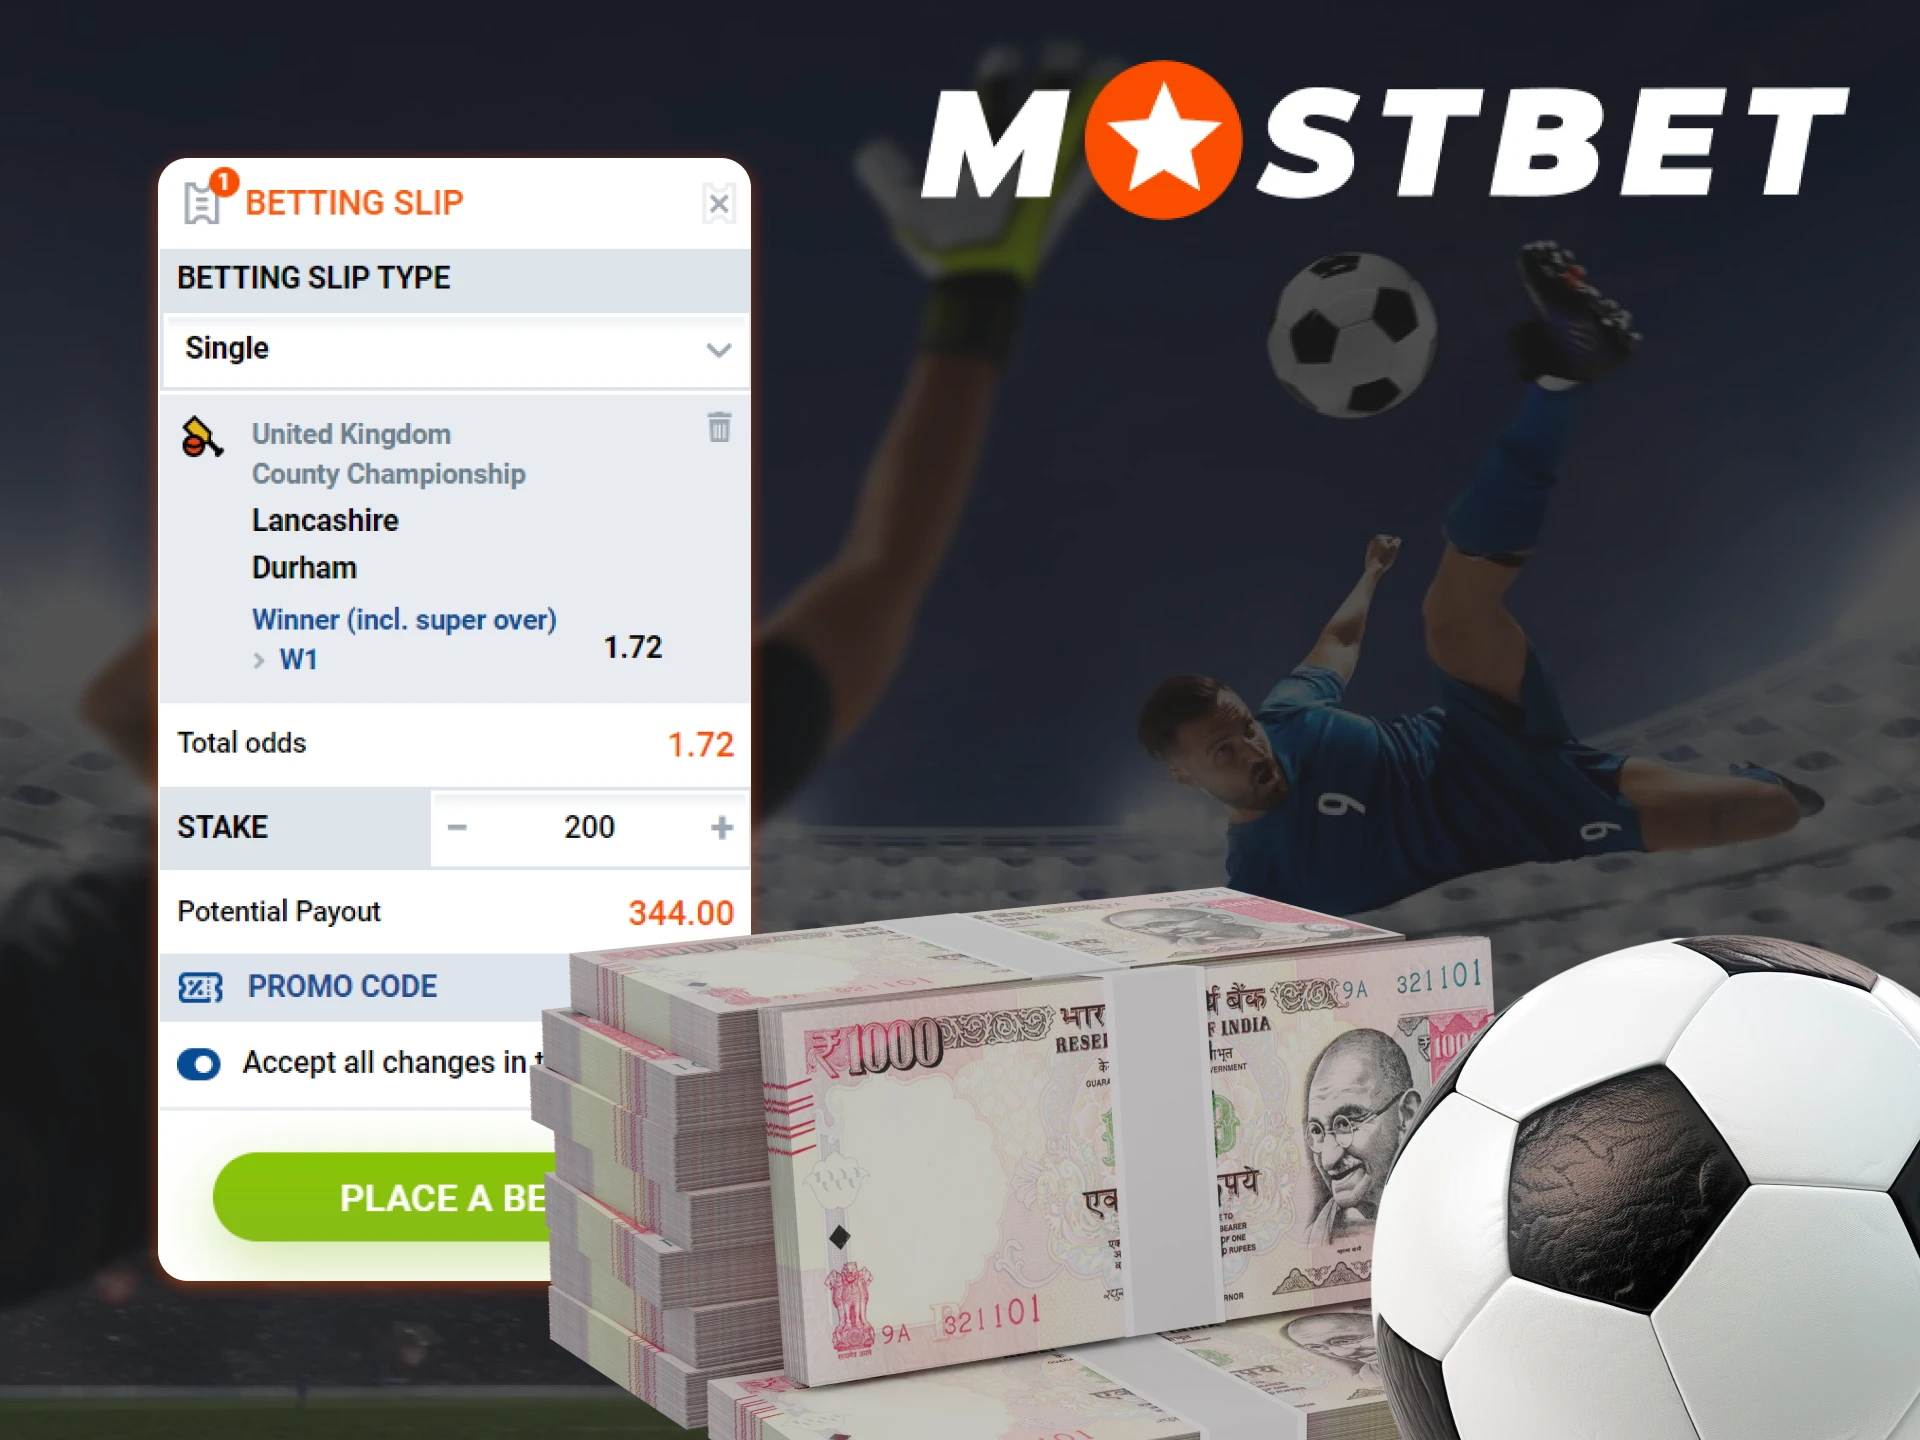 Place bets on sports at Mostbet quickly and easily.